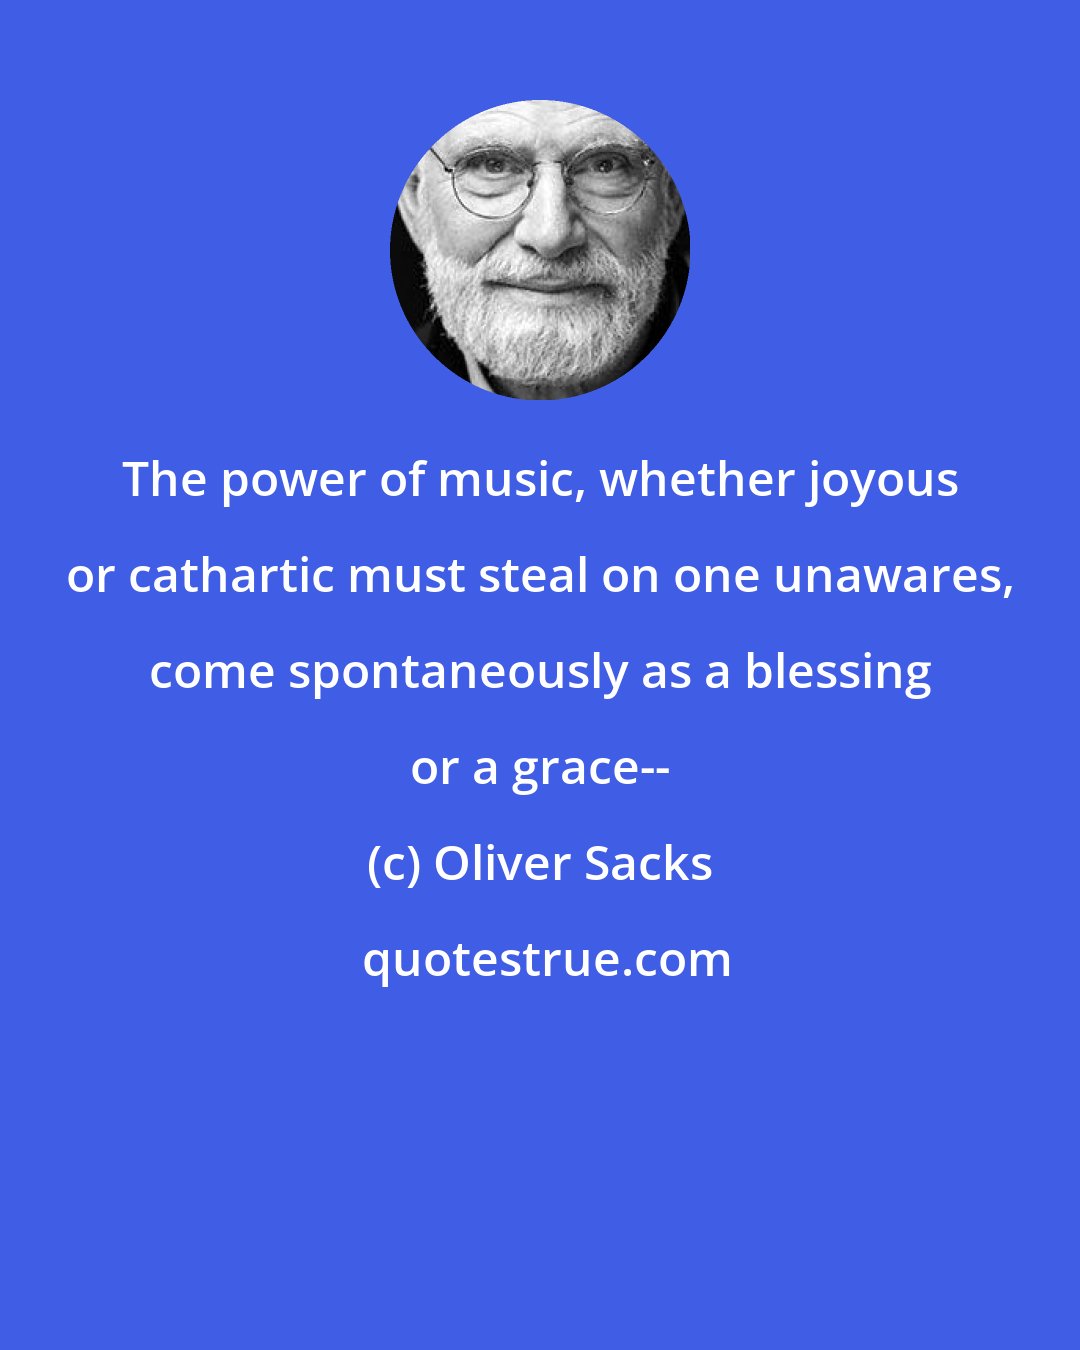 Oliver Sacks: The power of music, whether joyous or cathartic must steal on one unawares, come spontaneously as a blessing or a grace--